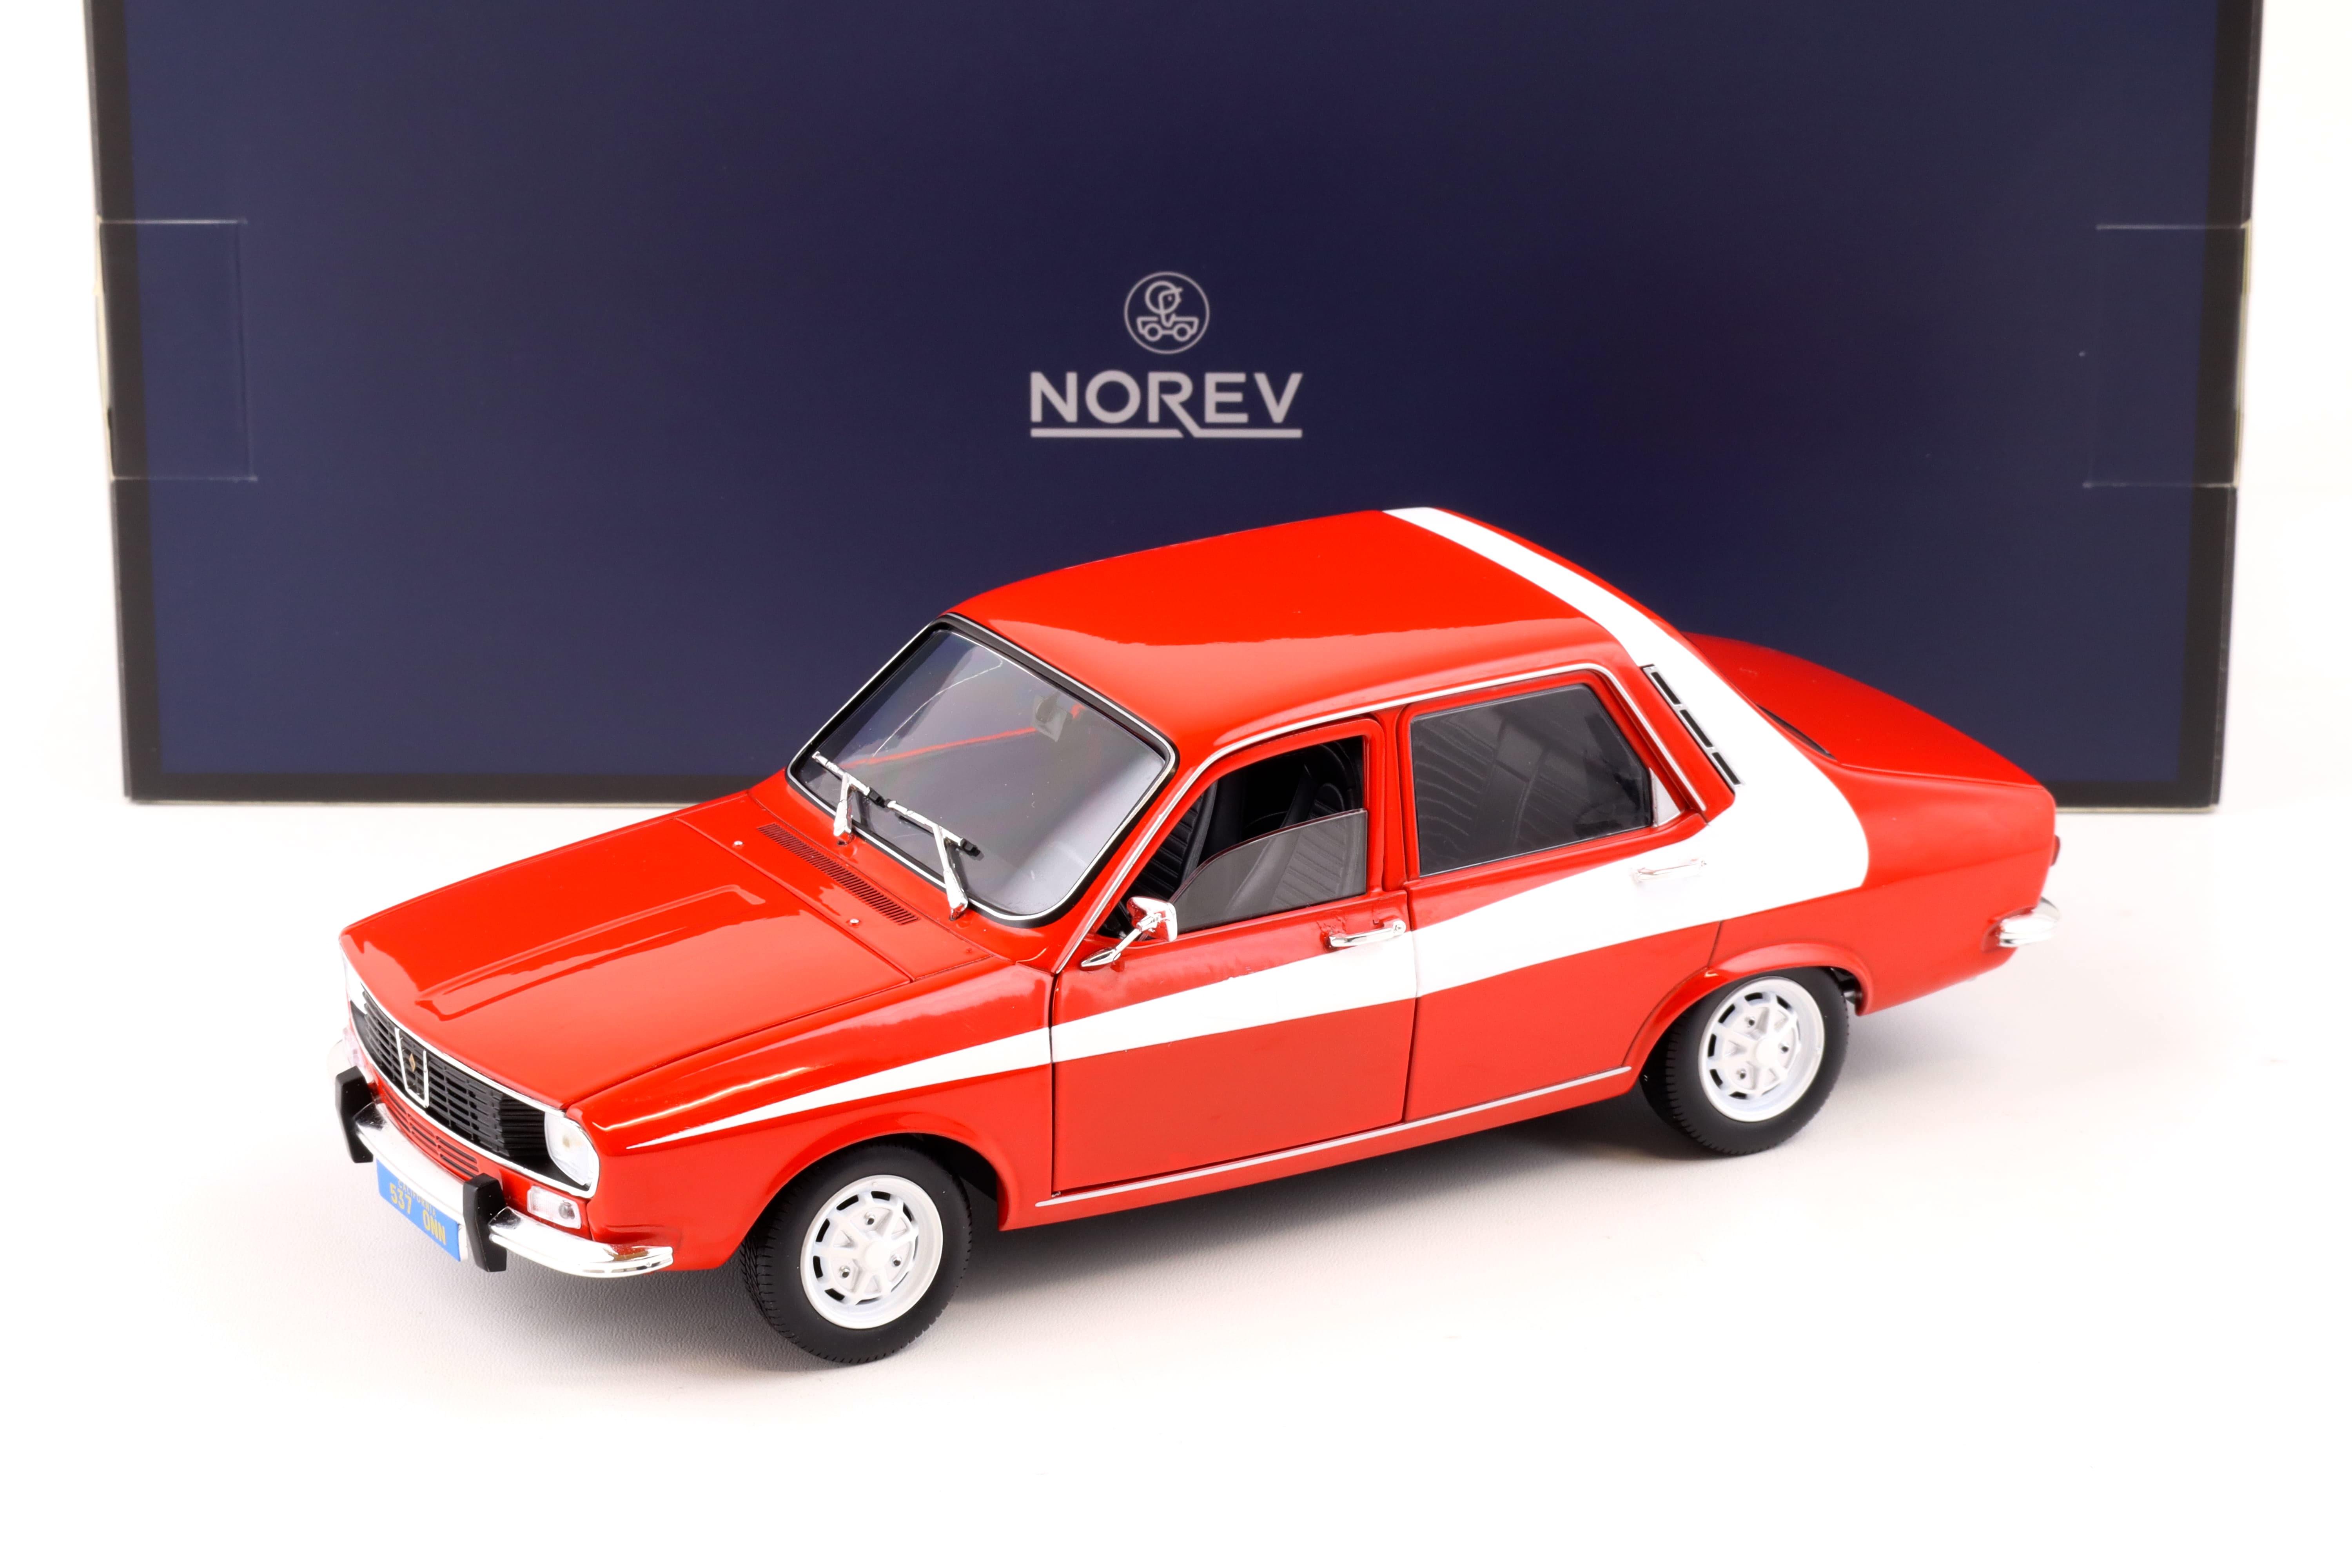 1:18 Norev Renault 12 red with white side deco 1975 - Limited 300 pcs.